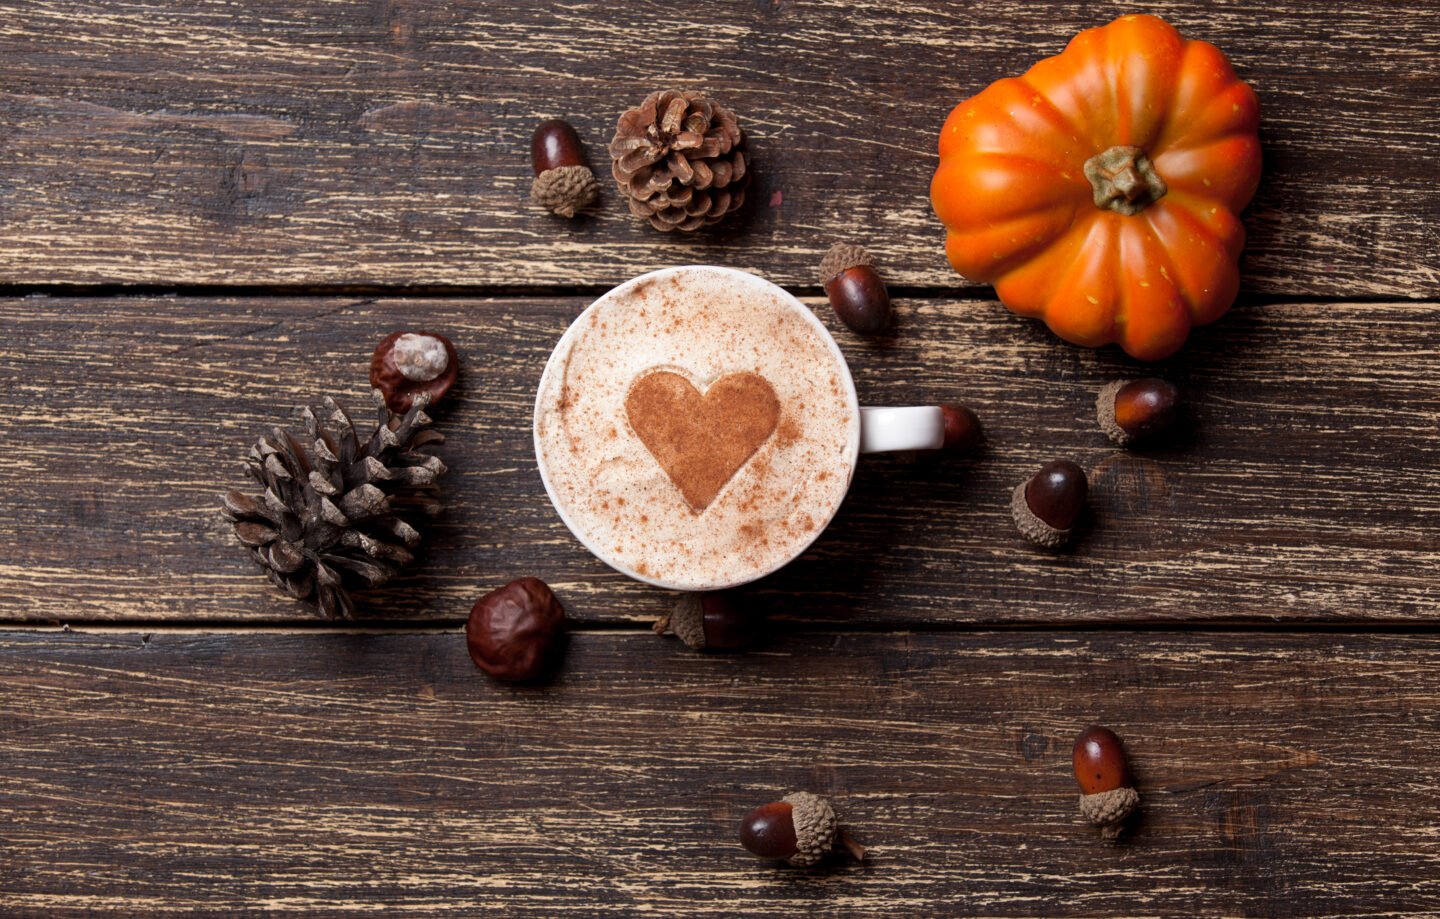 flavored-coffee-with-acorn-and-pumpkin-in-the-background